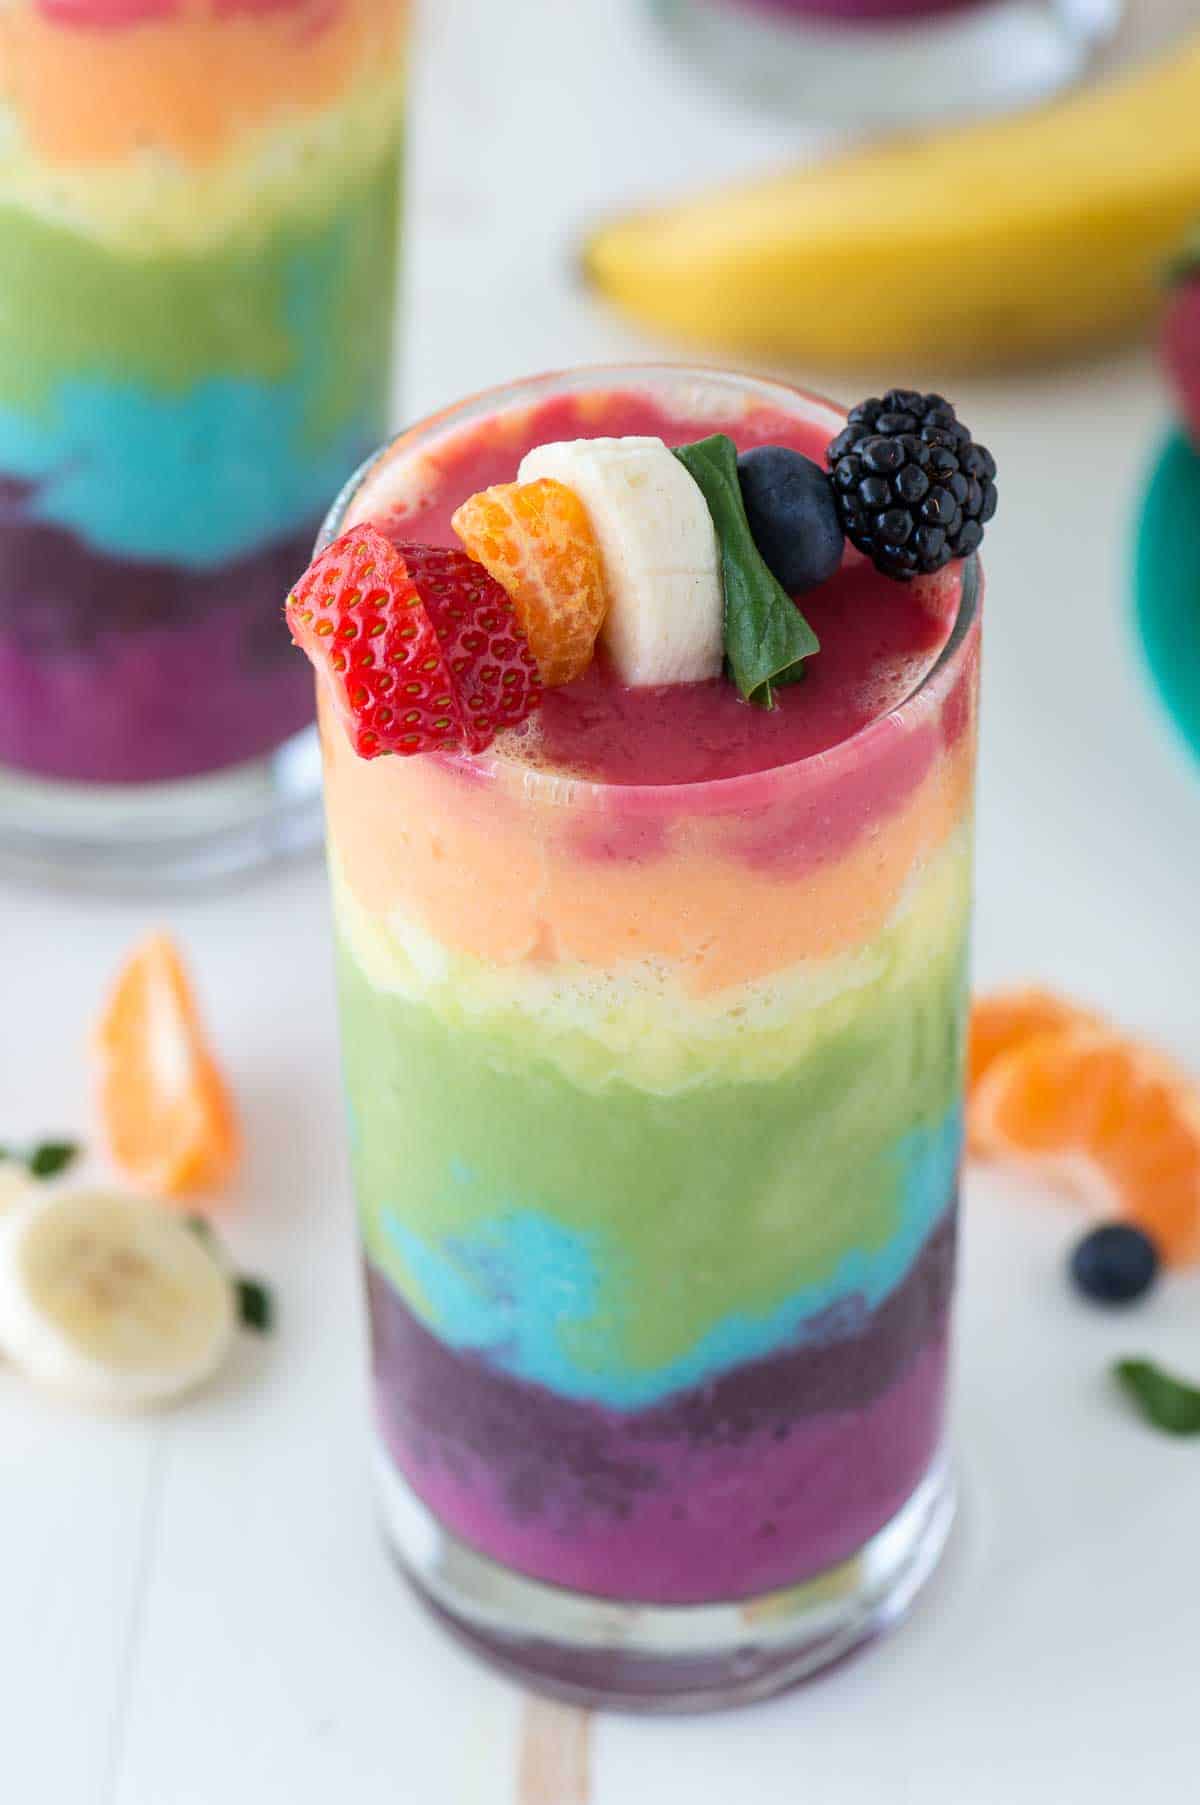 rainbow smoothie layered in glass cup with strawberry, orange, banana, spinach, blueberry and blackberry on top